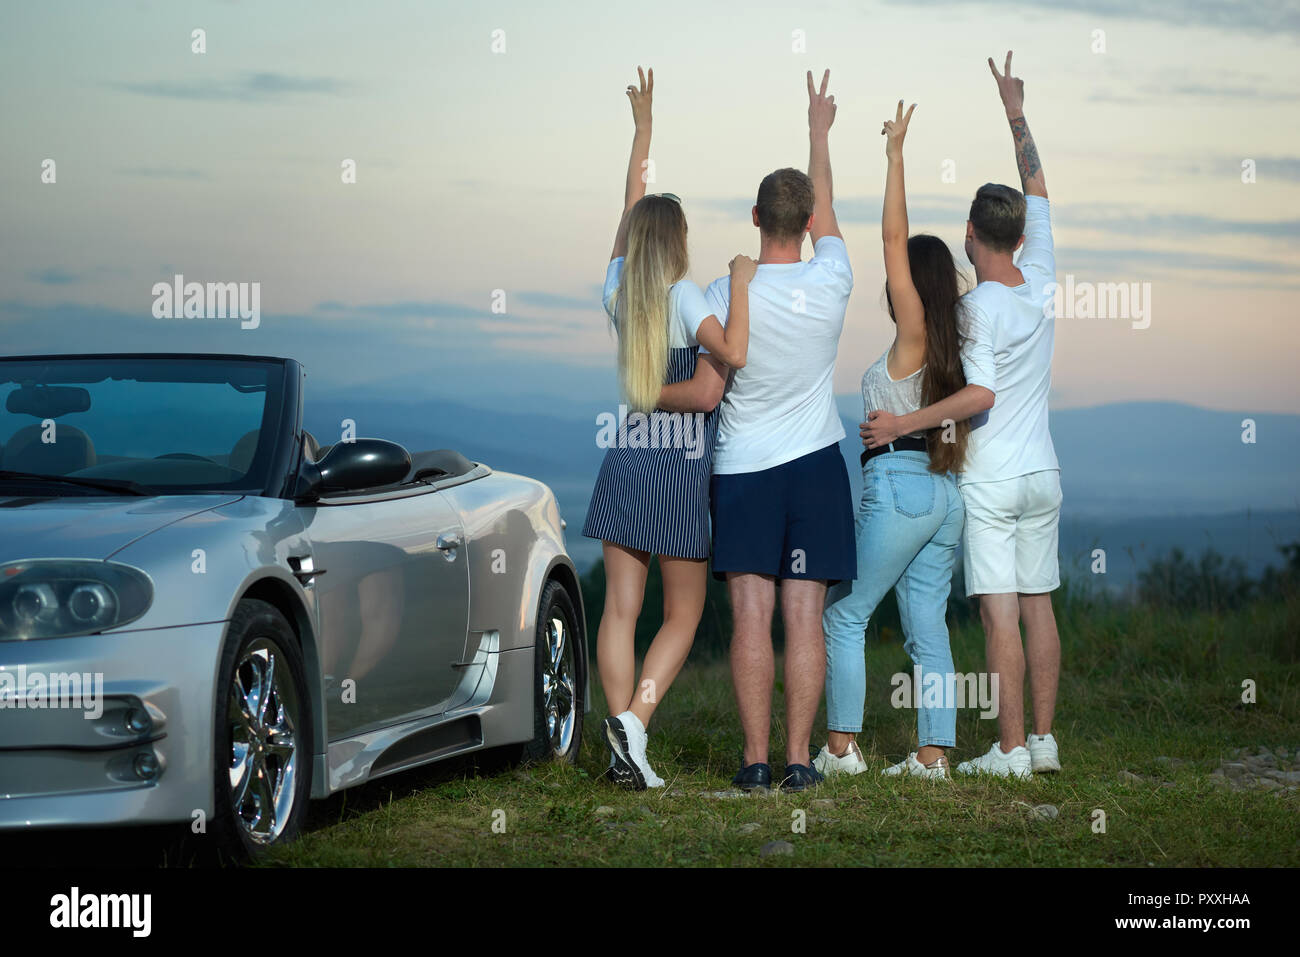 Back view of two couples standing, admiring amazing view and landscapes, holding hands up and showing peace. Man putting arms round girls' waists. Friends posing near silver cabriolet. Stock Photo